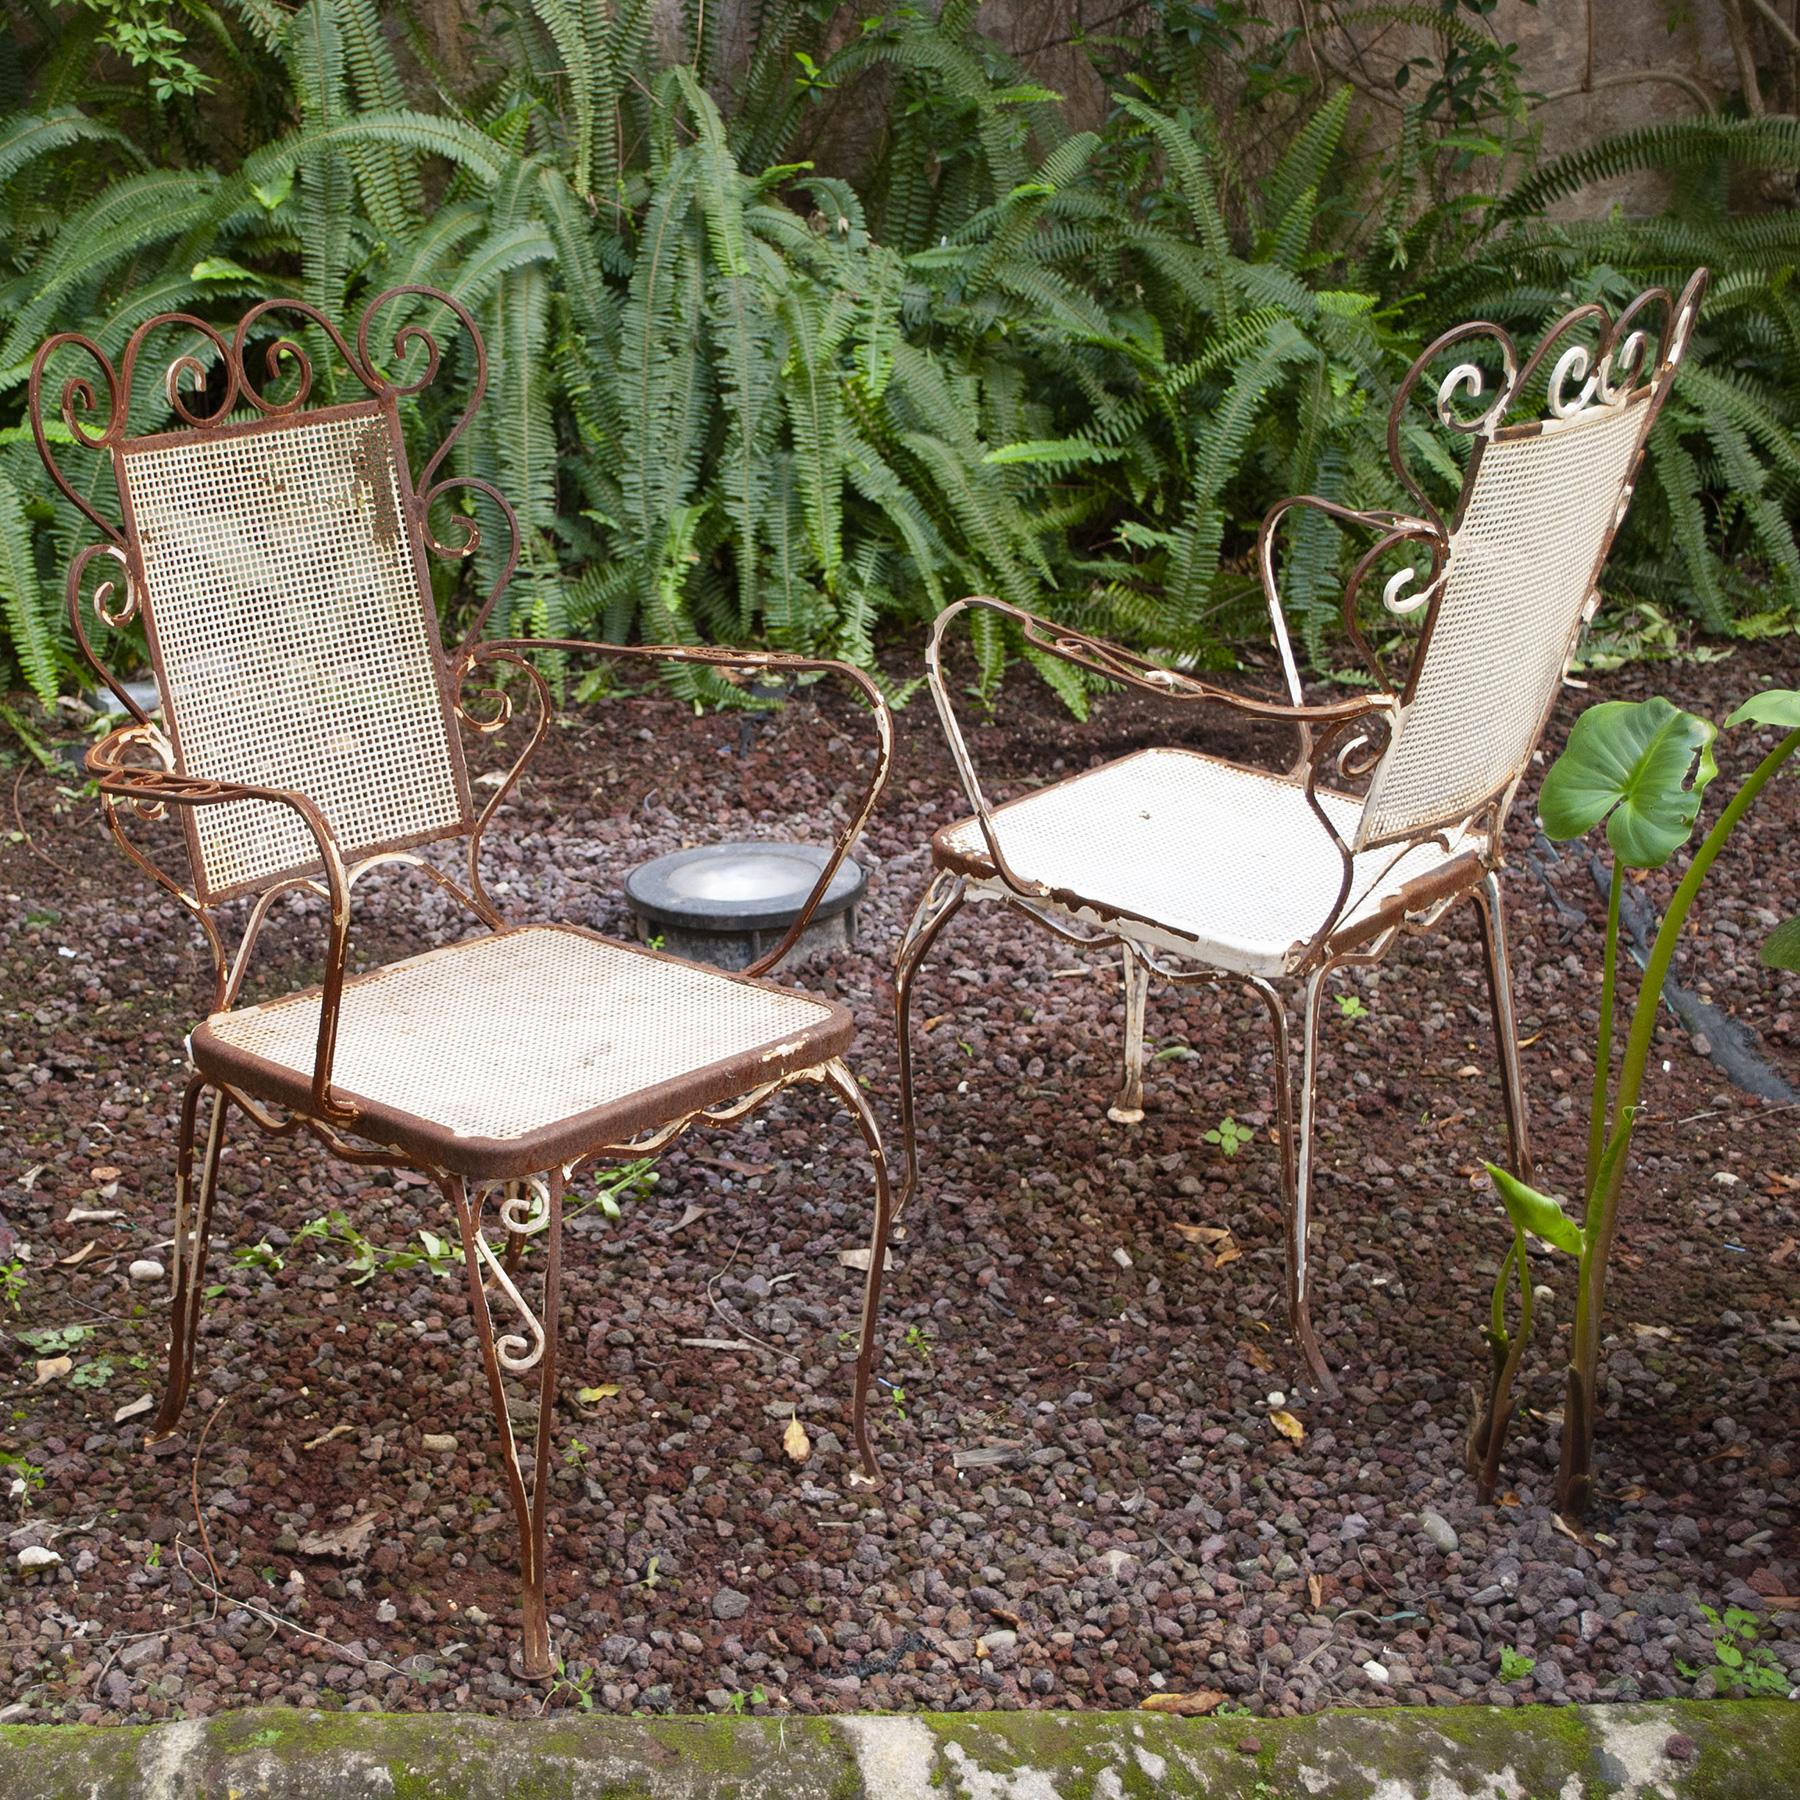 Mid-20th Century Wrought Iron Chairs from the 1950s Casa e Giardino For Sale